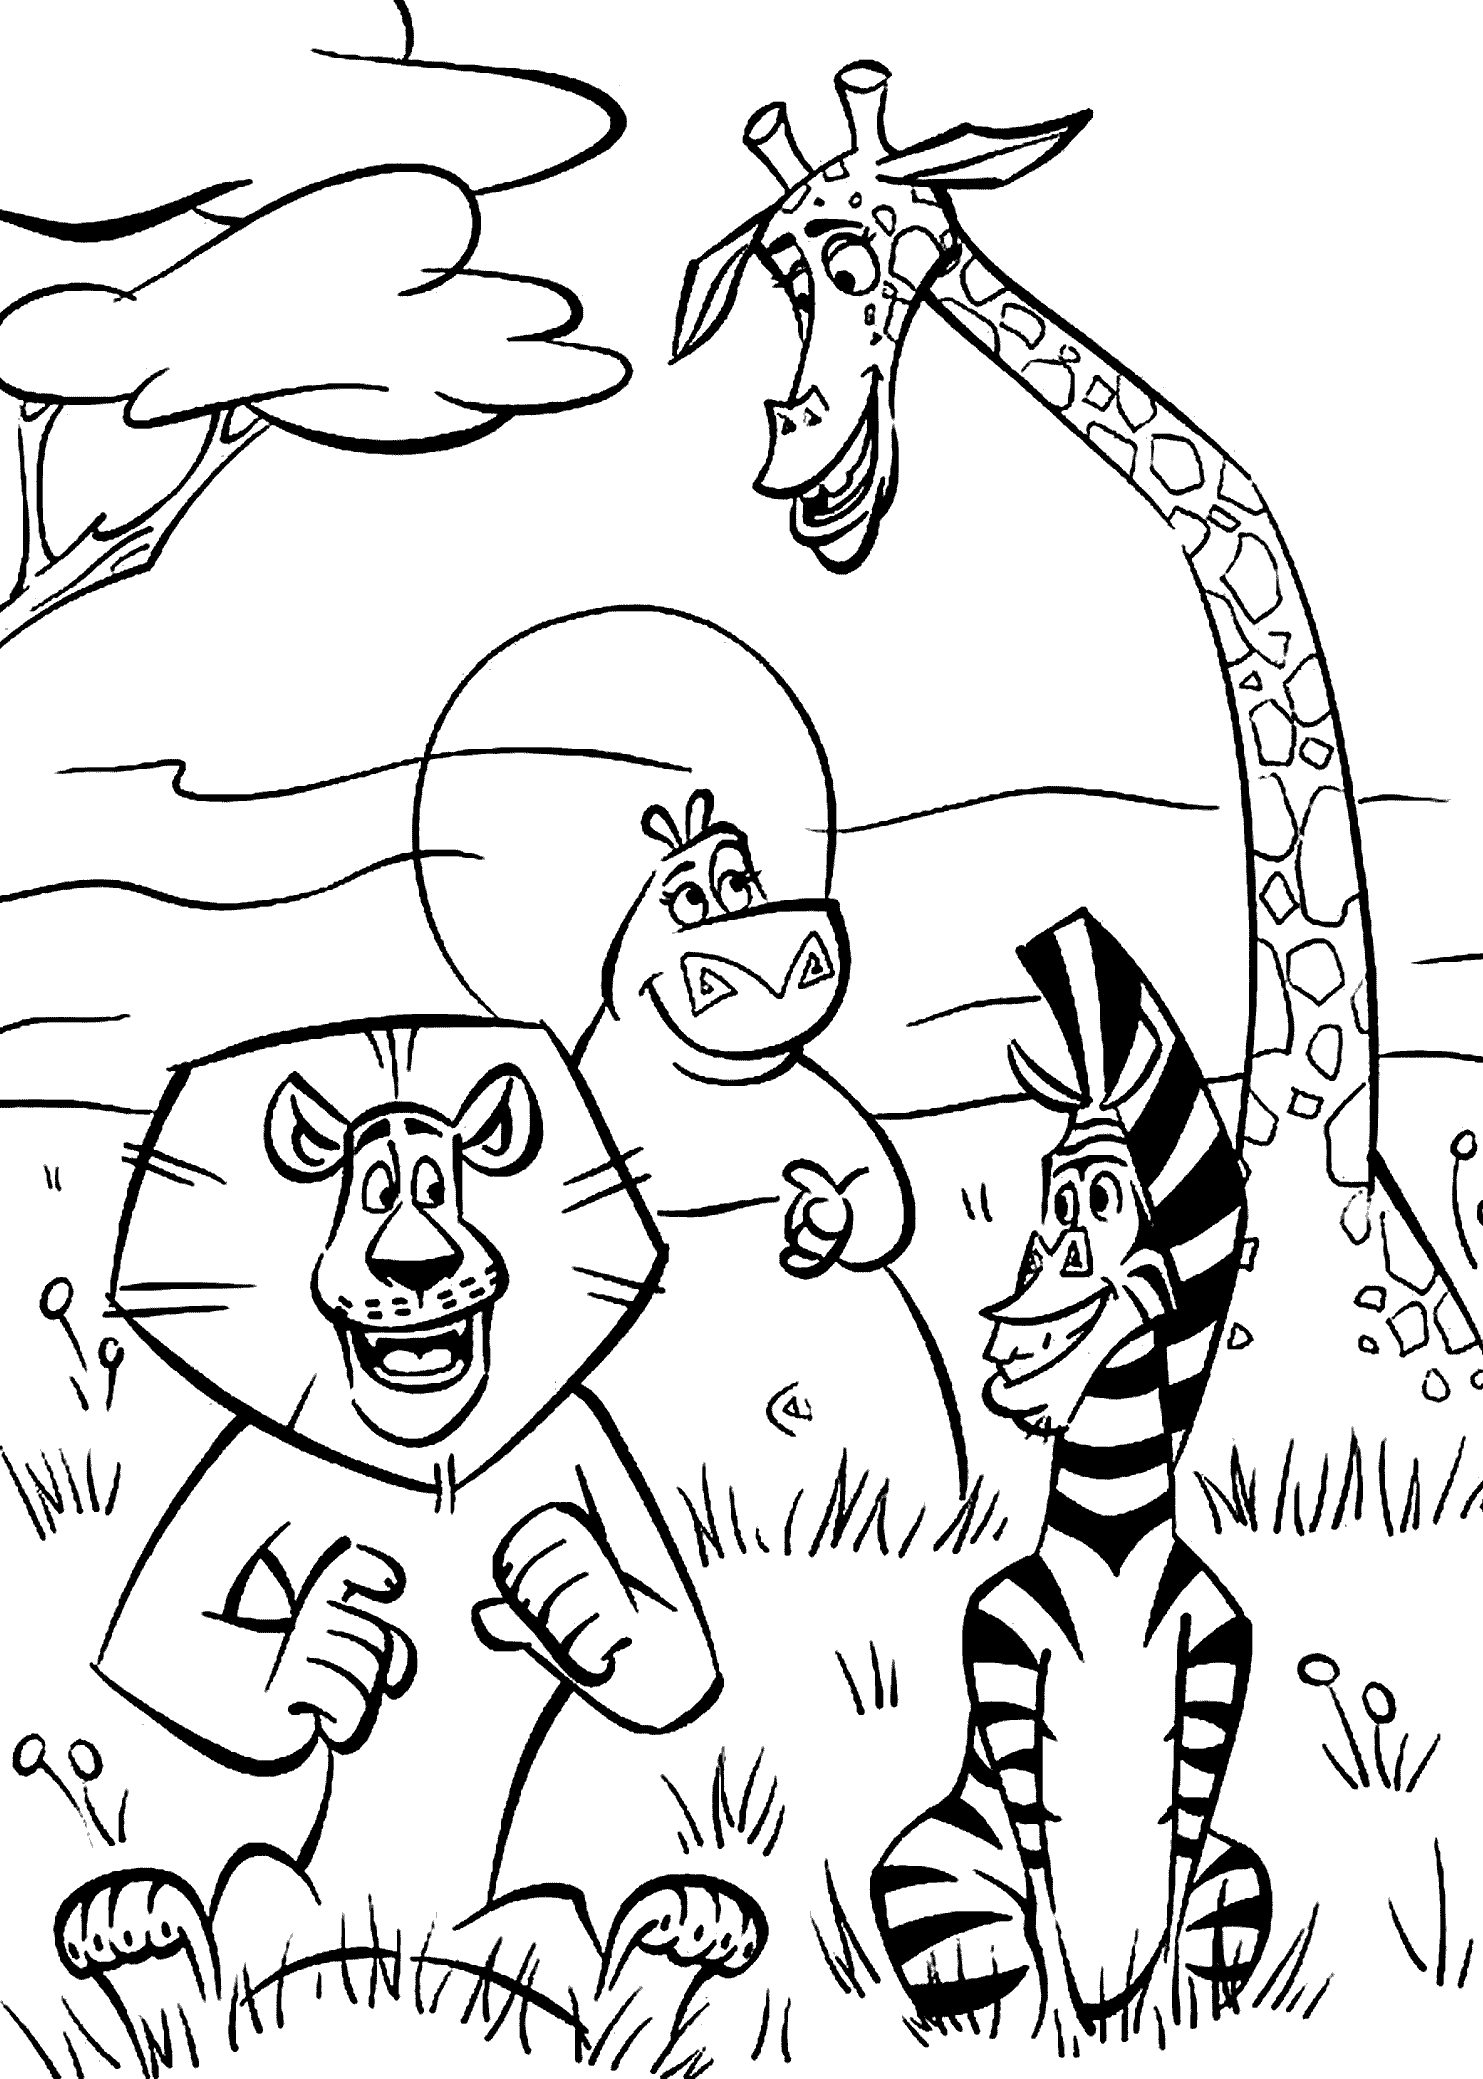 Download Madagascar Coloring Pages - Best Coloring Pages For Kids